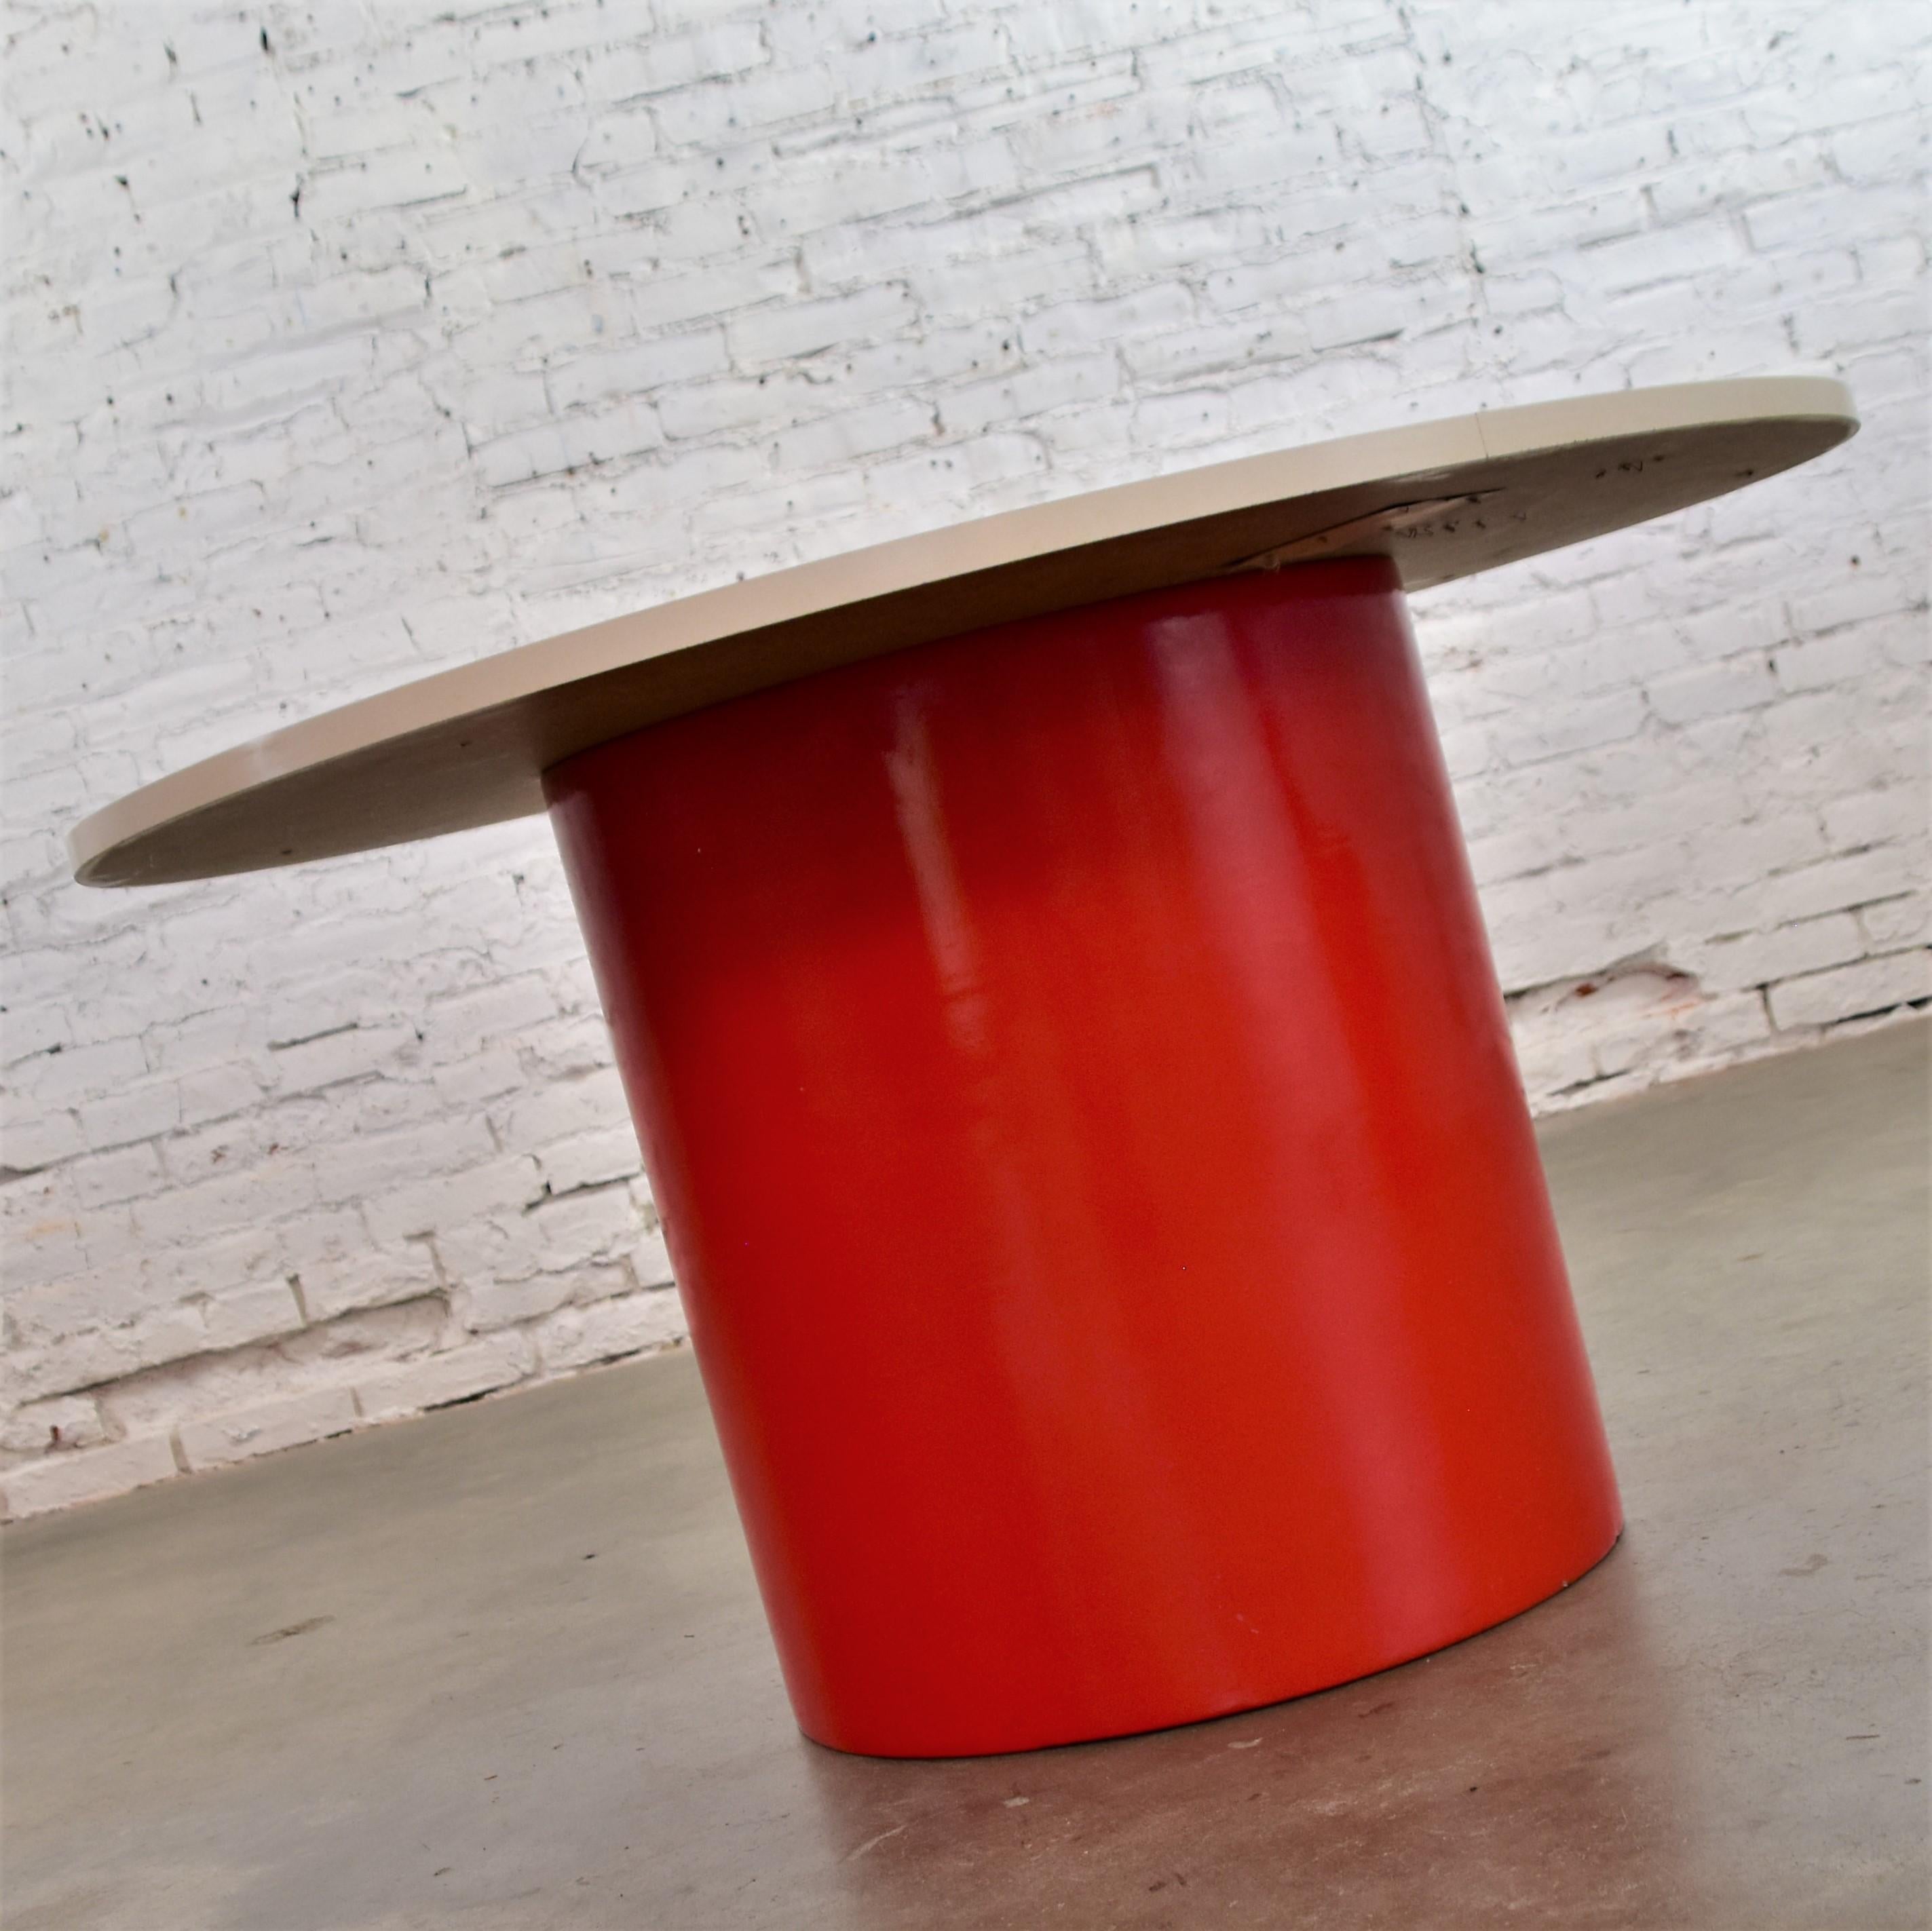 Awesome Mod Style & Mid-Century Modern New Design Idiom Table by Milo Baughman for Thayer Coggin Red Vinyl Base & White Laminate Top. Beautiful condition, keeping in mind that this is vintage and not new so will have signs of use and wear. The